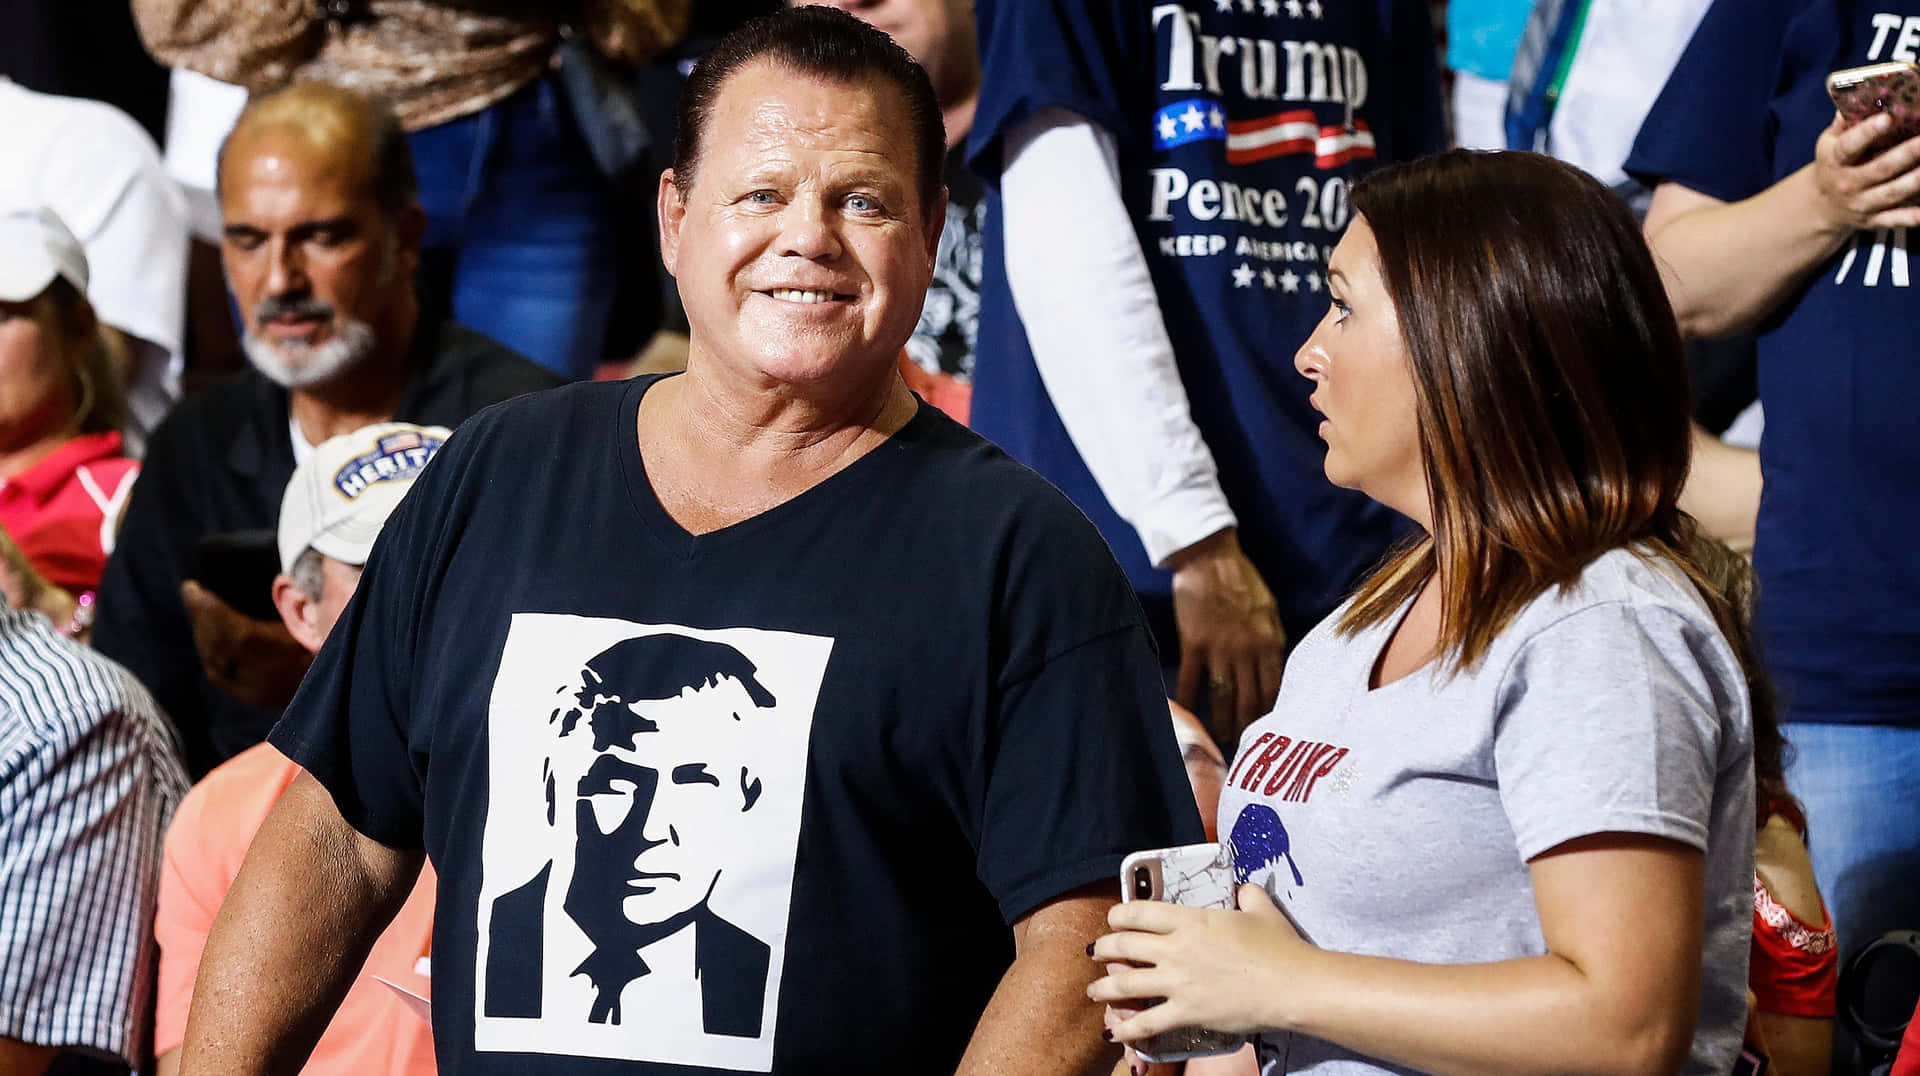 Legendary WWE Commentator Jerry Lawler at Trump Rally Wallpaper